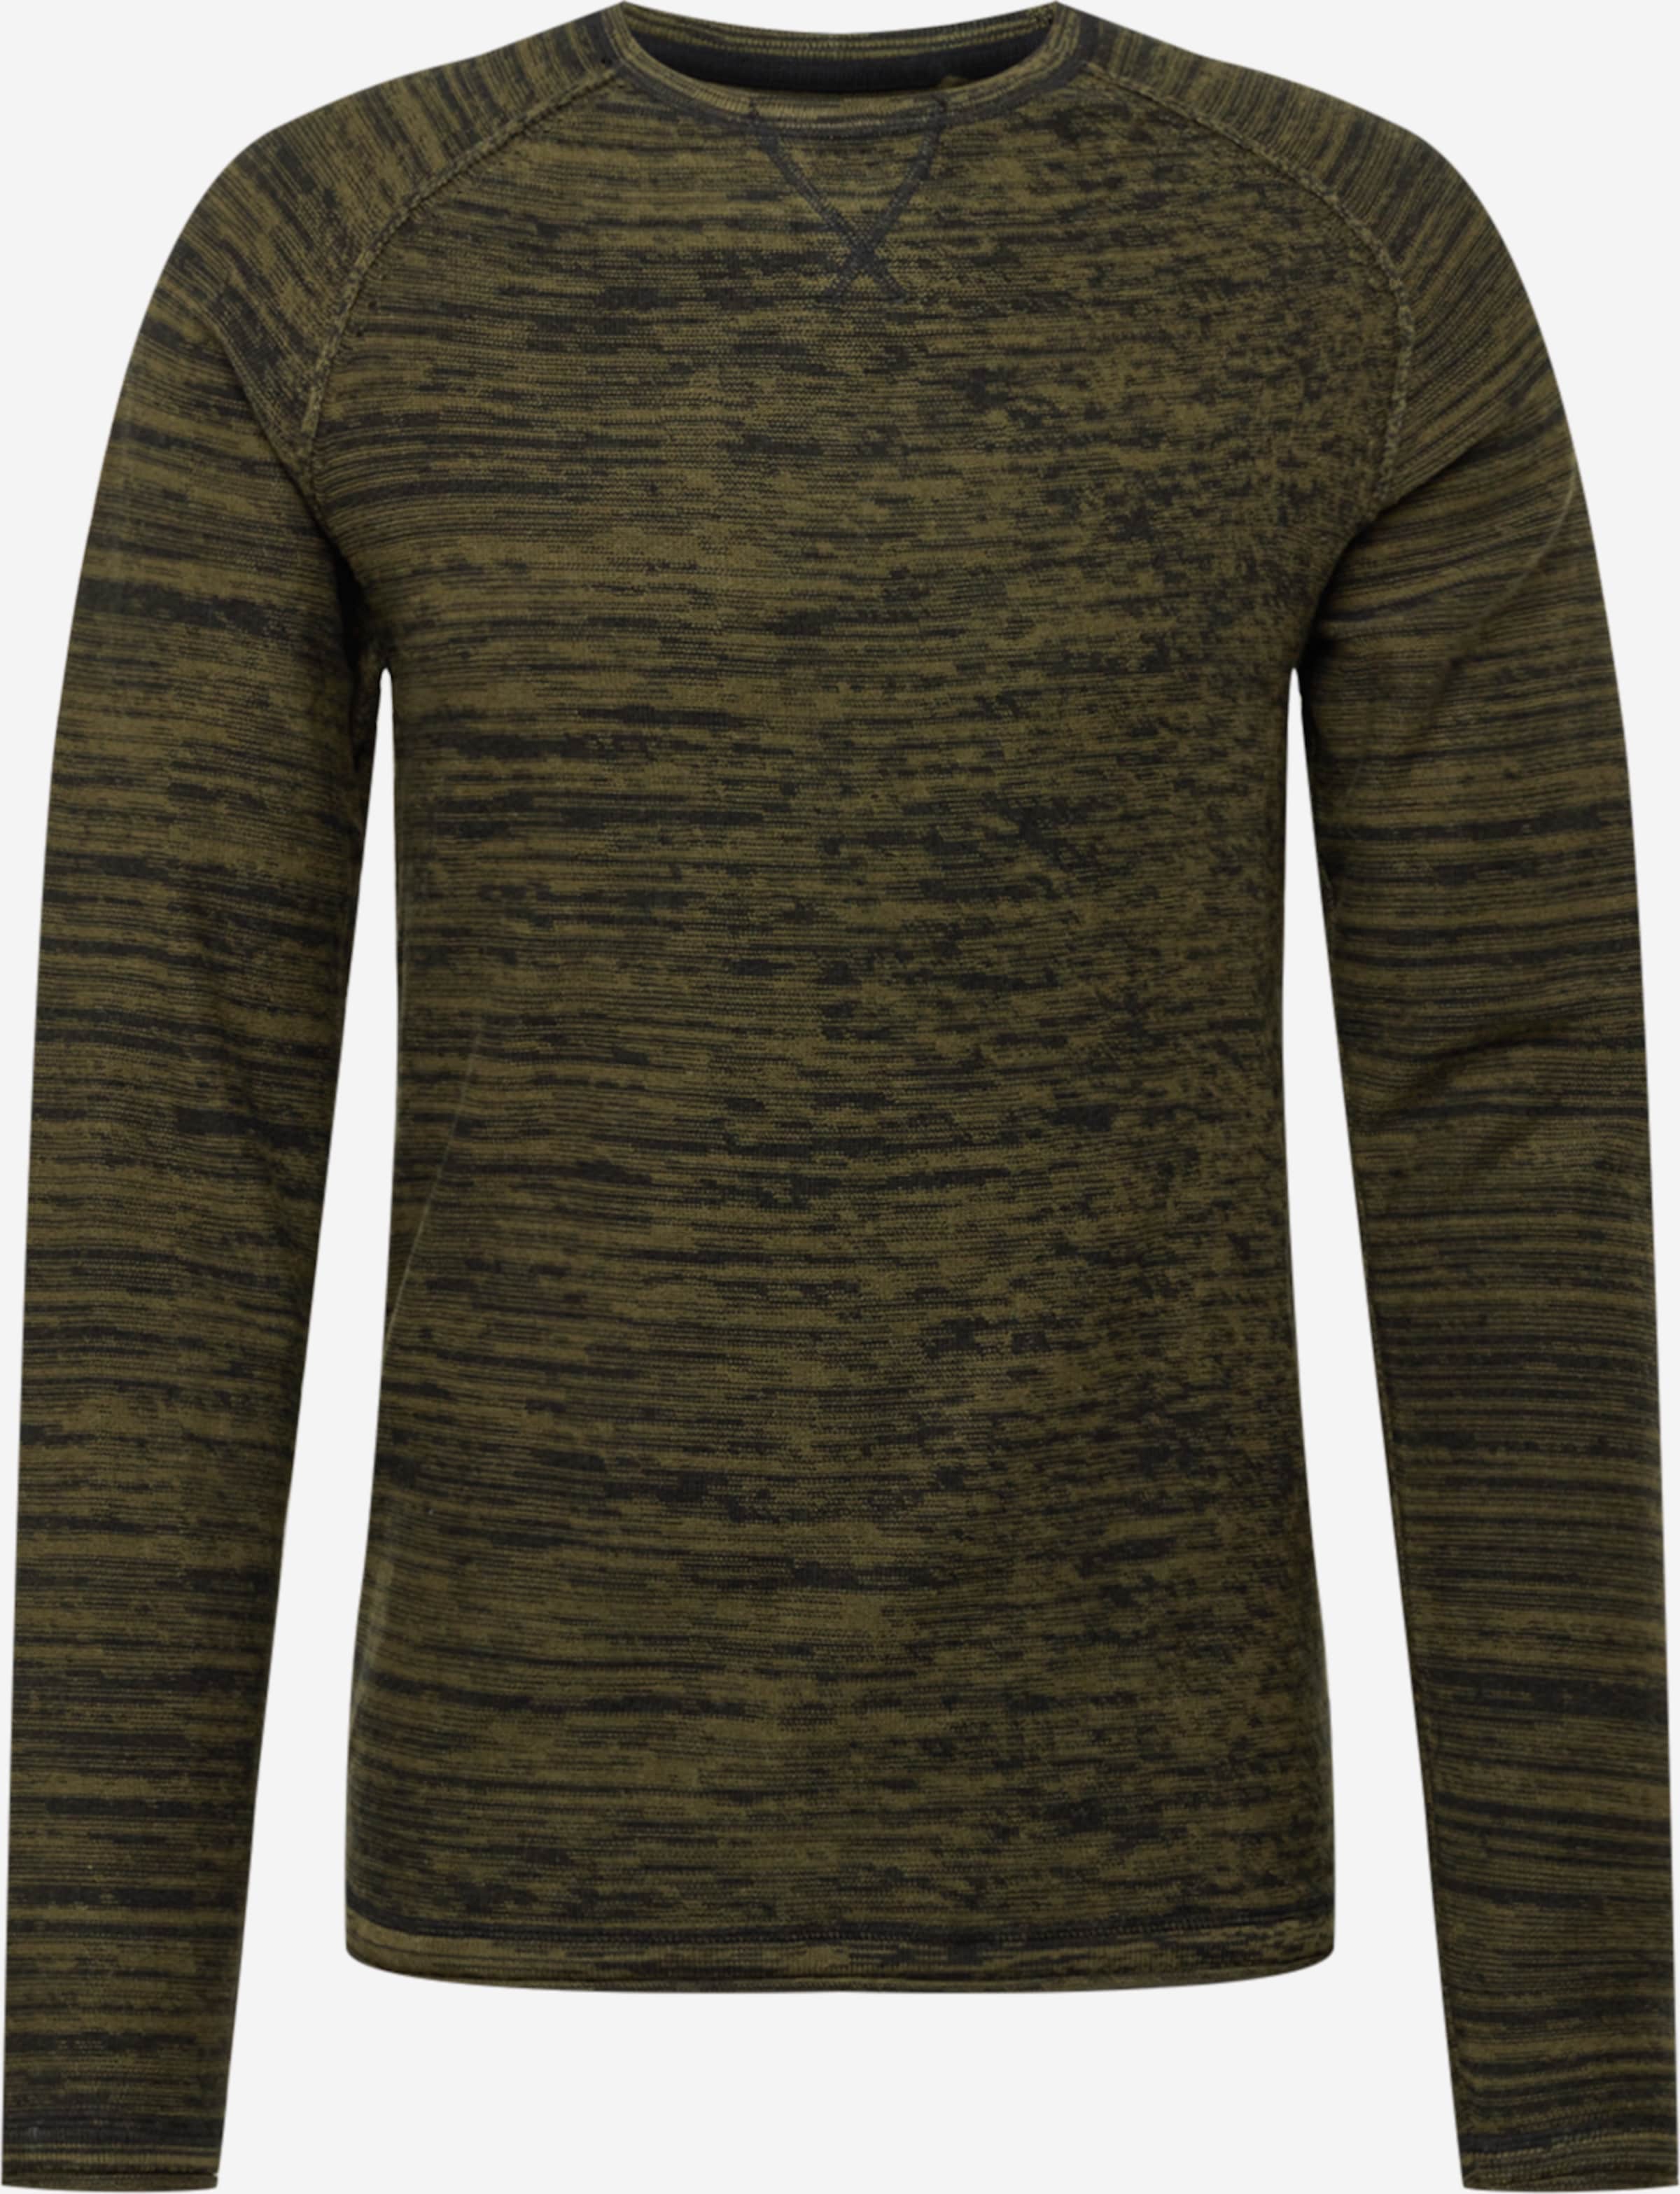 ABOUT | in BLEND YOU Pullover Grünmeliert Oliv,